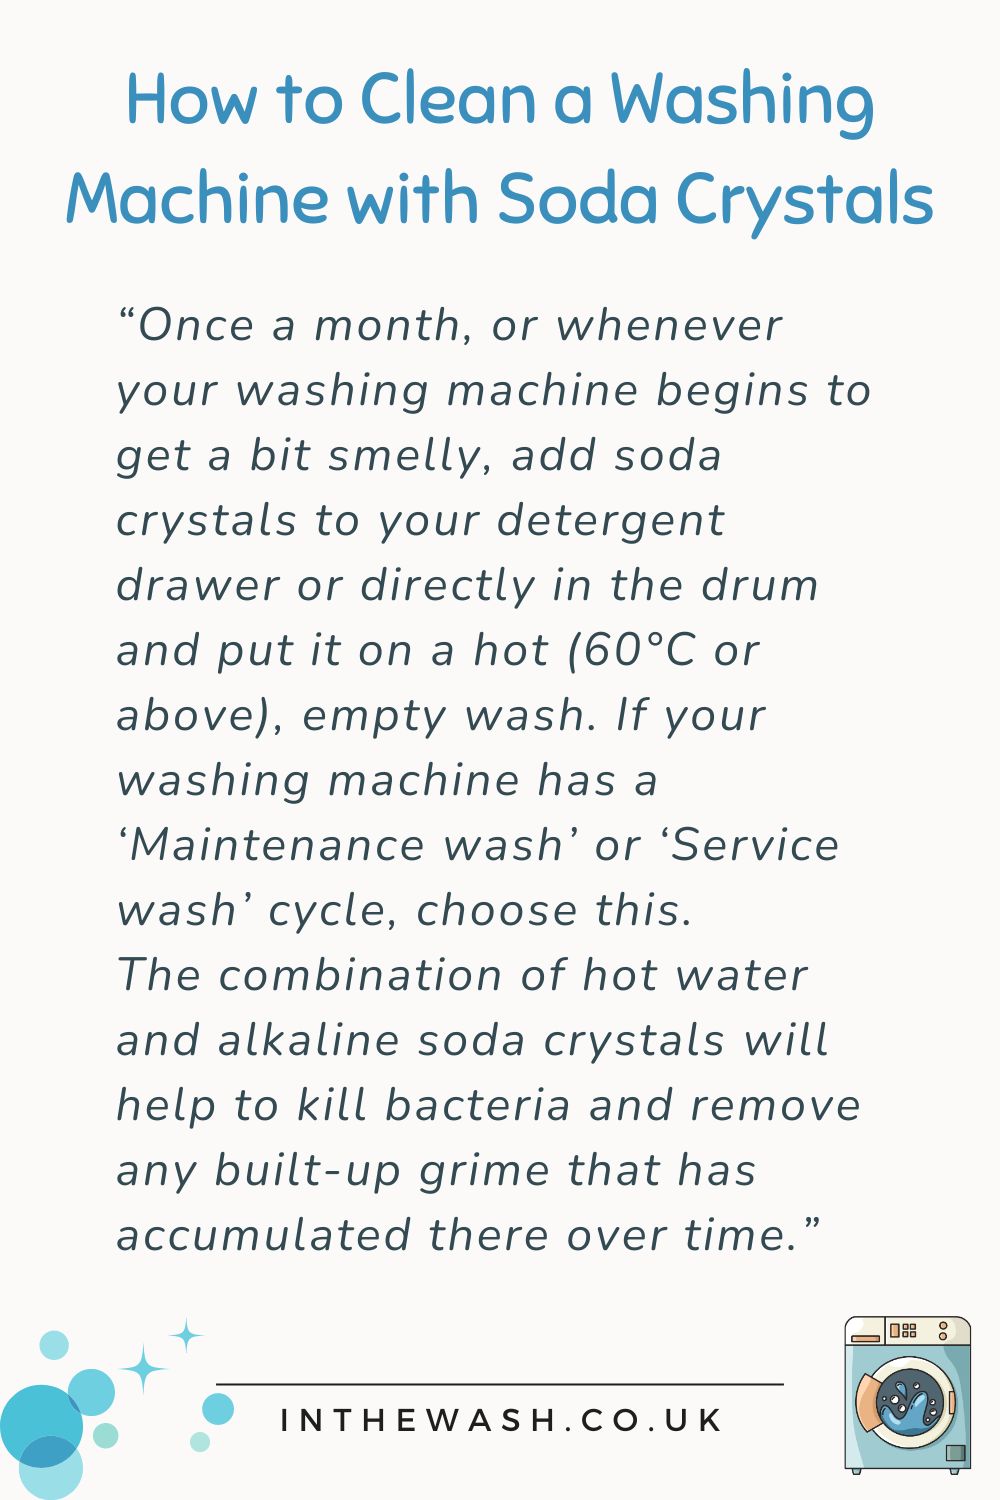 How to Clean a Washing Machine with Soda Crystals